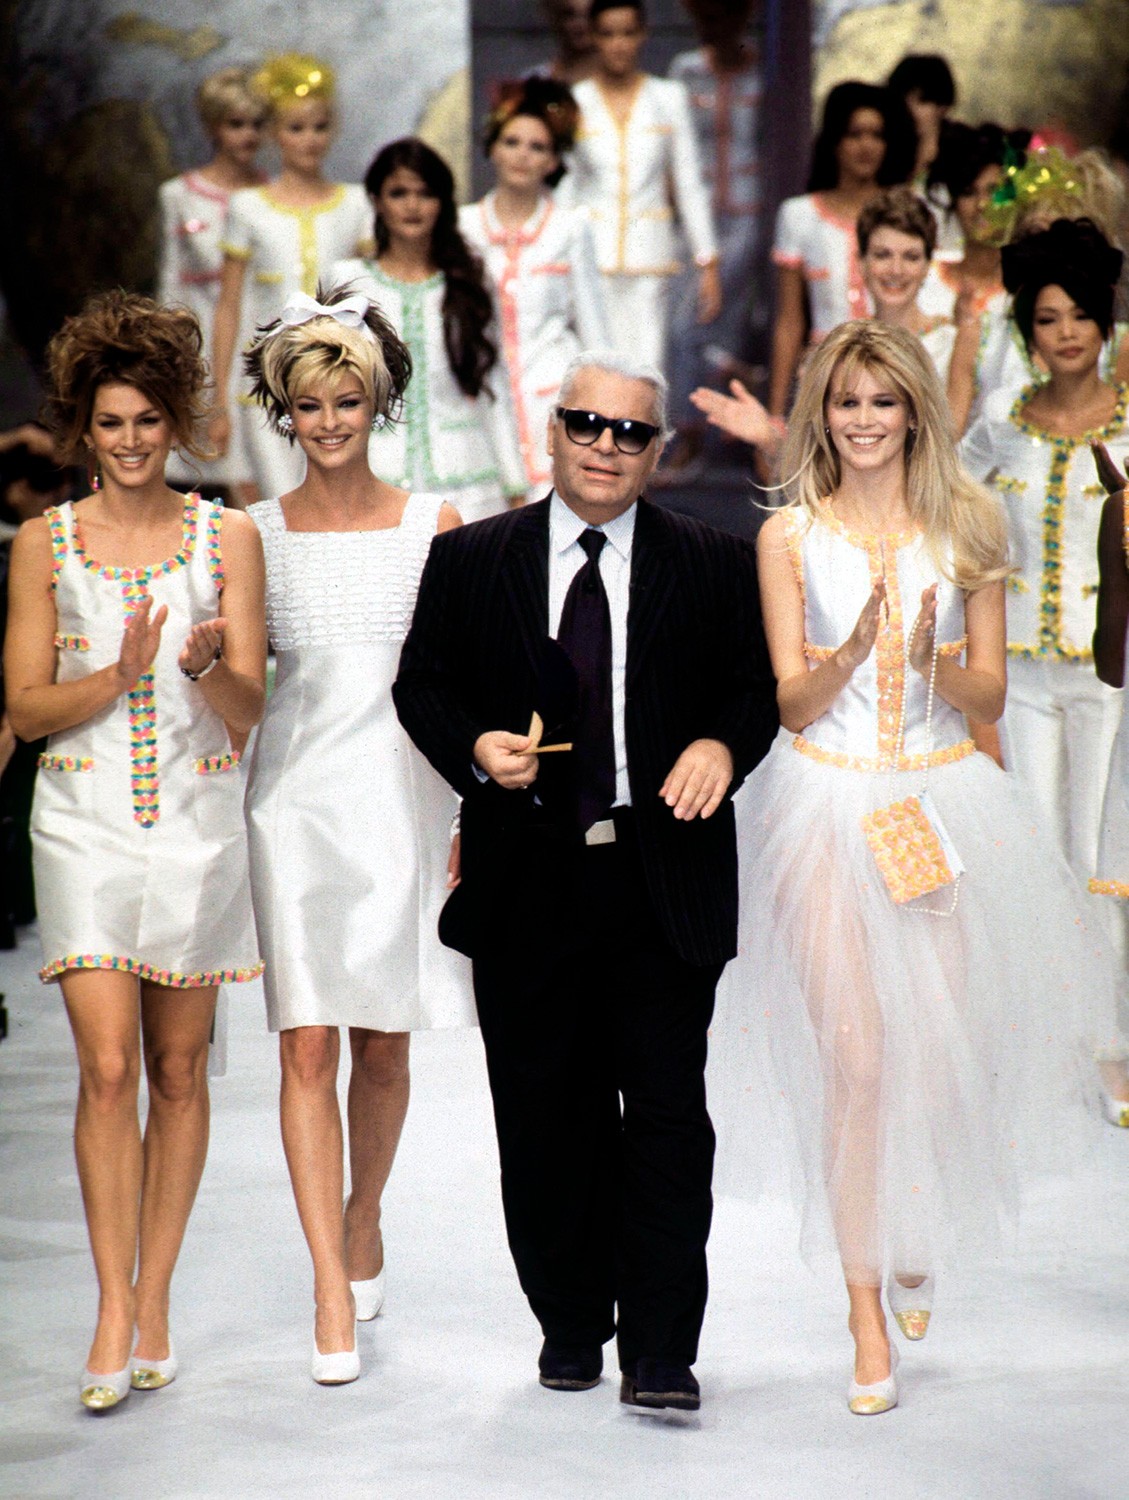 Karl Lagerfeld's Chanel Spring 1992 Couture Show: A Look Back